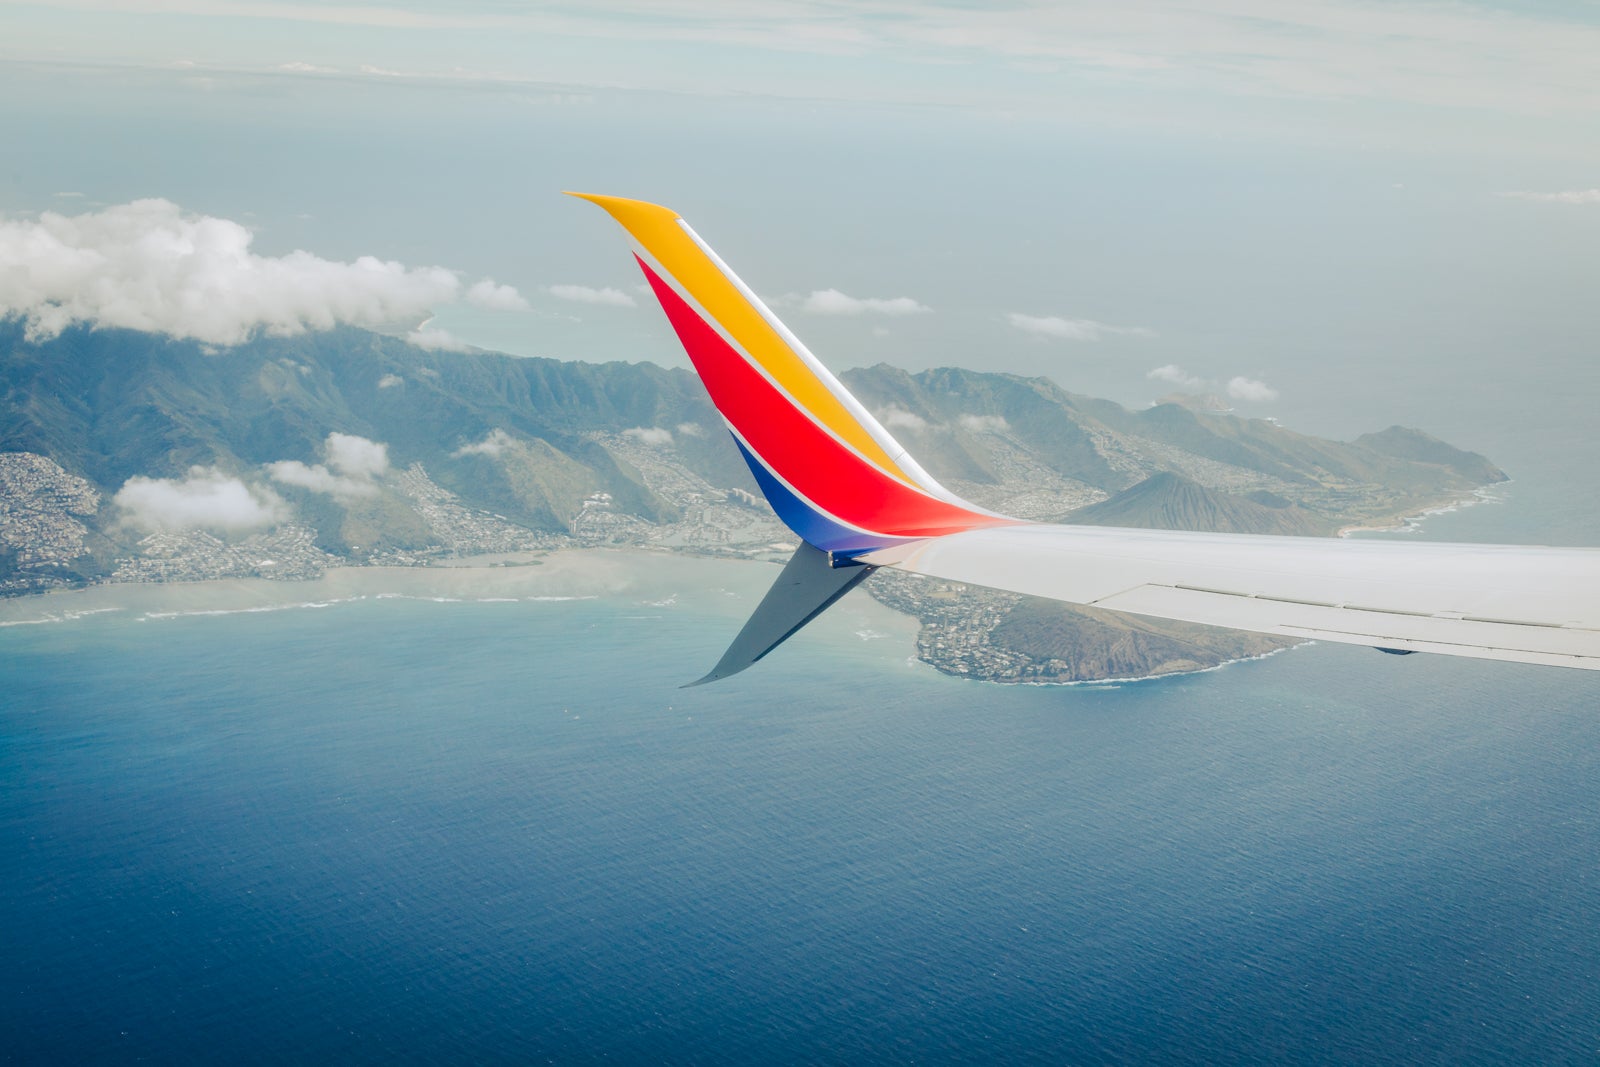 the wing of a Southwest Airlines plane is seen from the plane window, flying over a lake and mountains